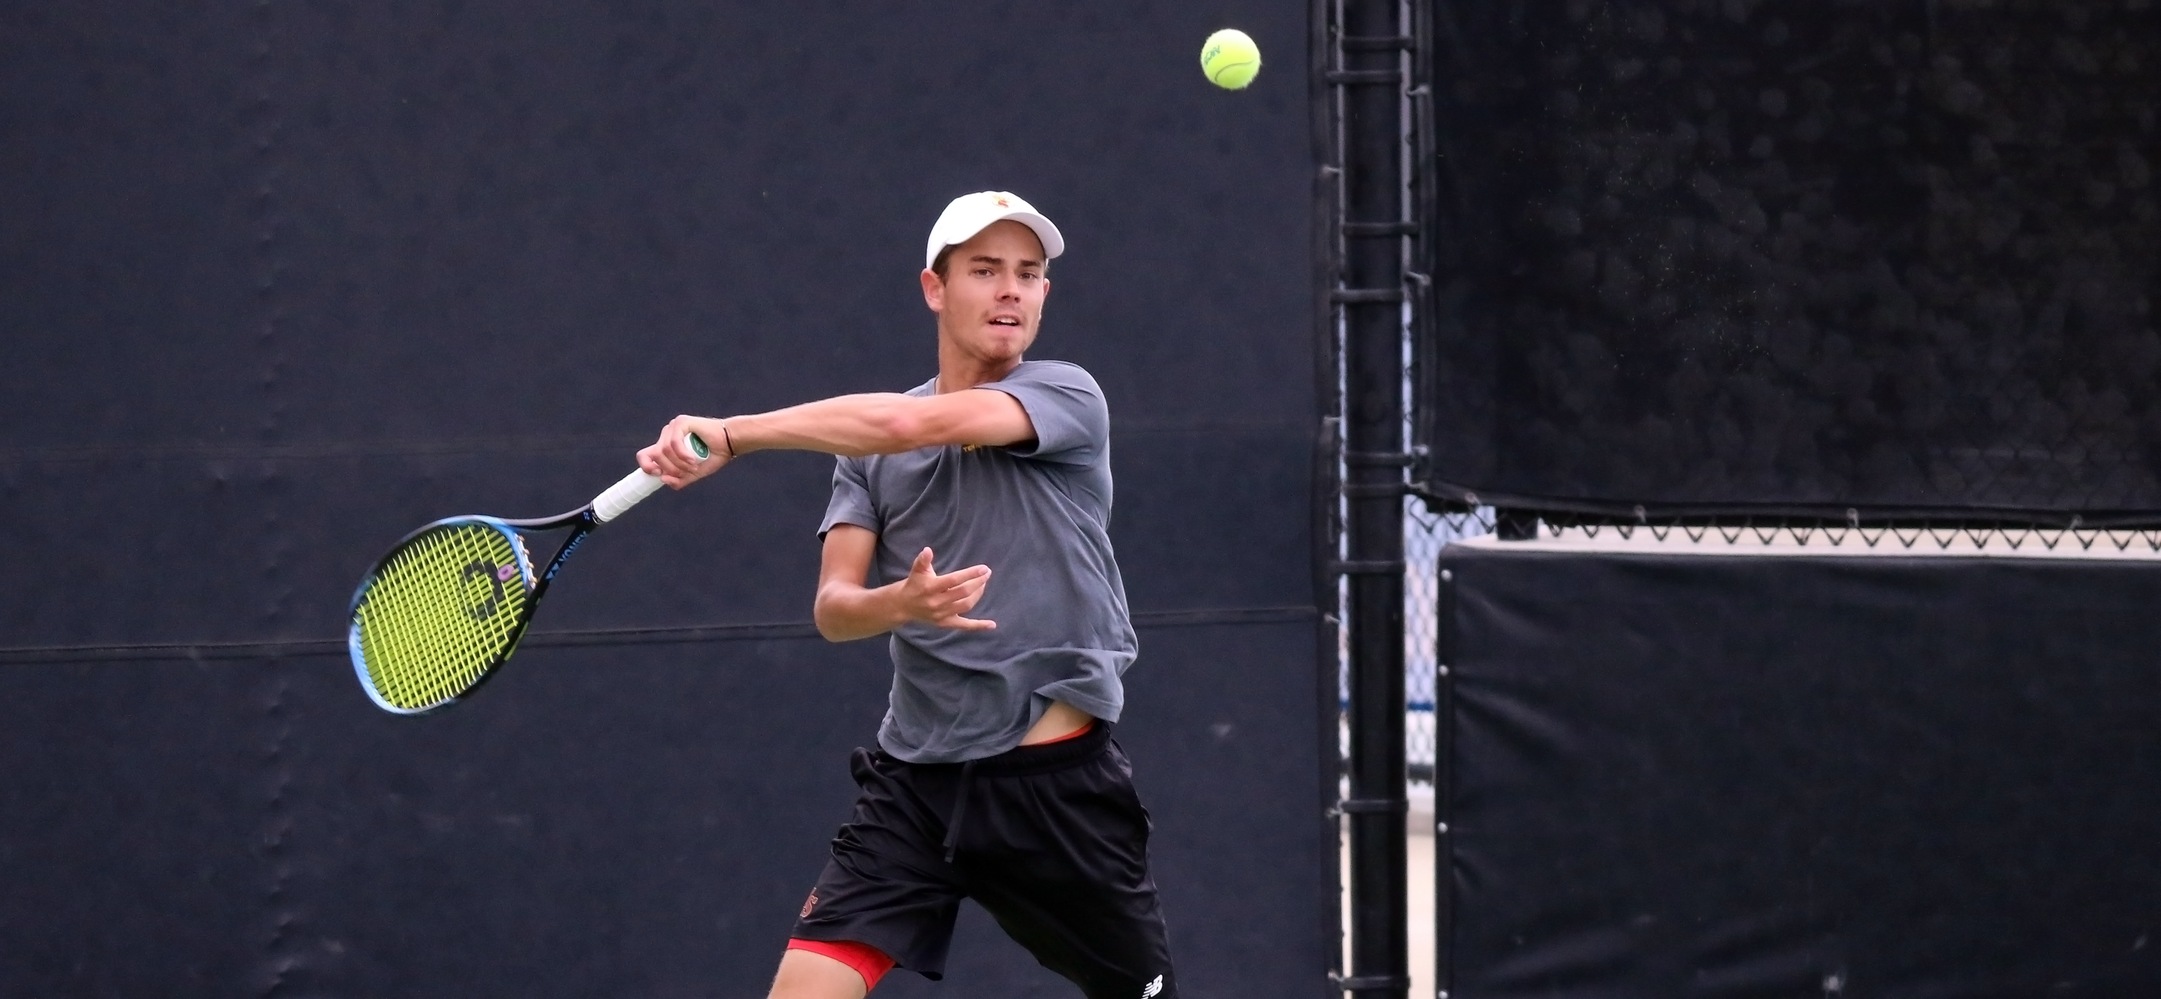 Freshman Nic Meister won at No. 6 singles to clinch CMS' 5-0 victory over Trinity University on Saturday